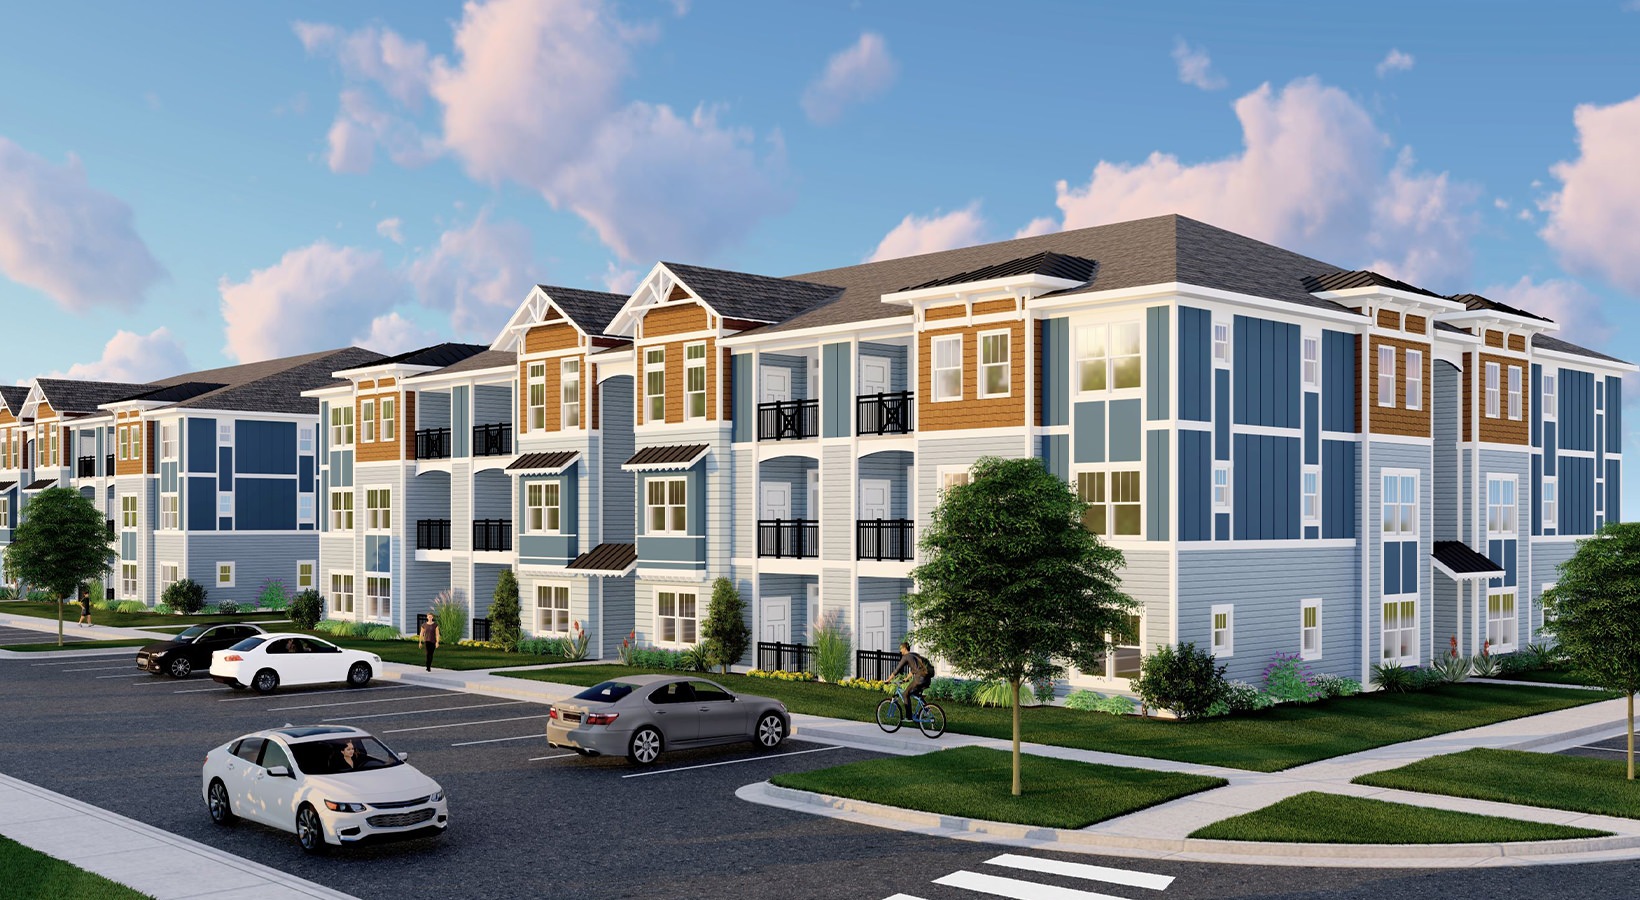 Luxury apartment homes by Hawthorne at Pine Forest in Oak Island, NC. Multi-story multi-family living.